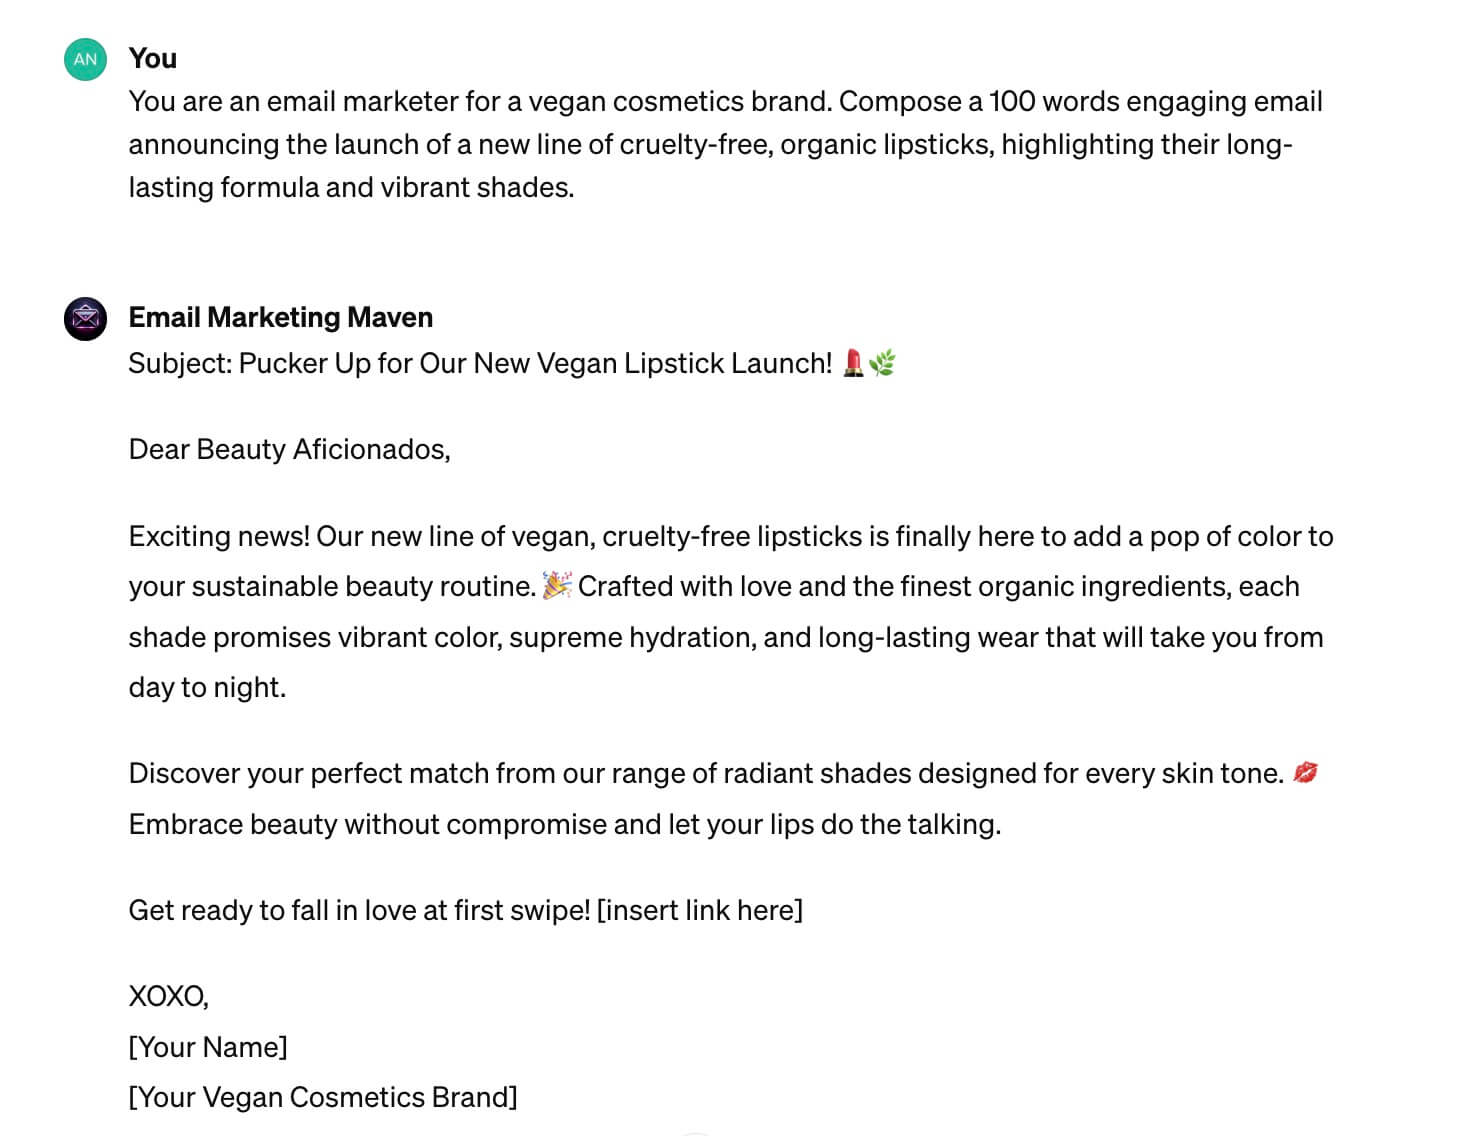 Example of an email prompt to compose a new vegan, cruelty-free, organic lipstick line launch announcement